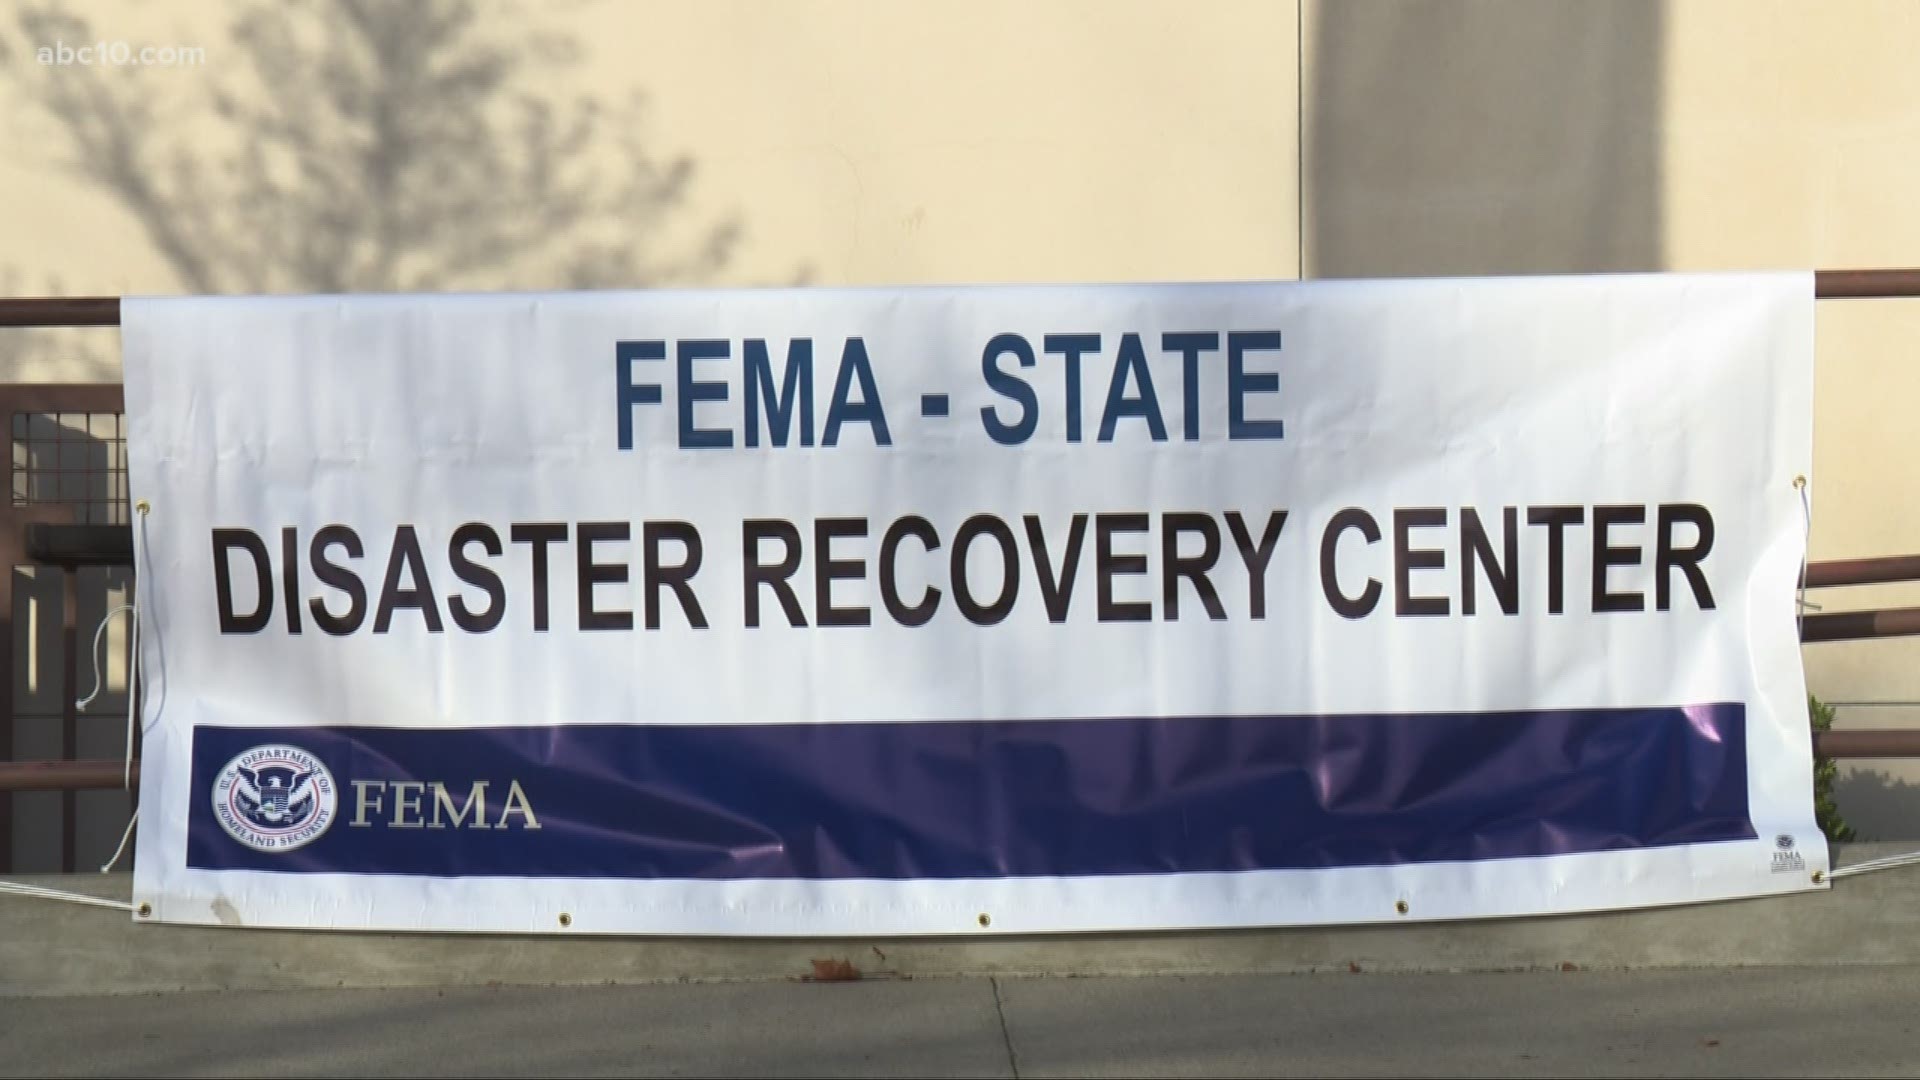 Six Mobile Disaster Recovery Centers are now open in Northern California to help displaced Camp Fire survivors.
Subscribe at: https://goo.gl/vai8Eu
Find ABC10 online: https://www.abc10.com/
Like ABC10 on Facebook: https://www.facebook.com/ABC10tv/
Follow ABC10 on Twitter: https://twitter.com/ABC10